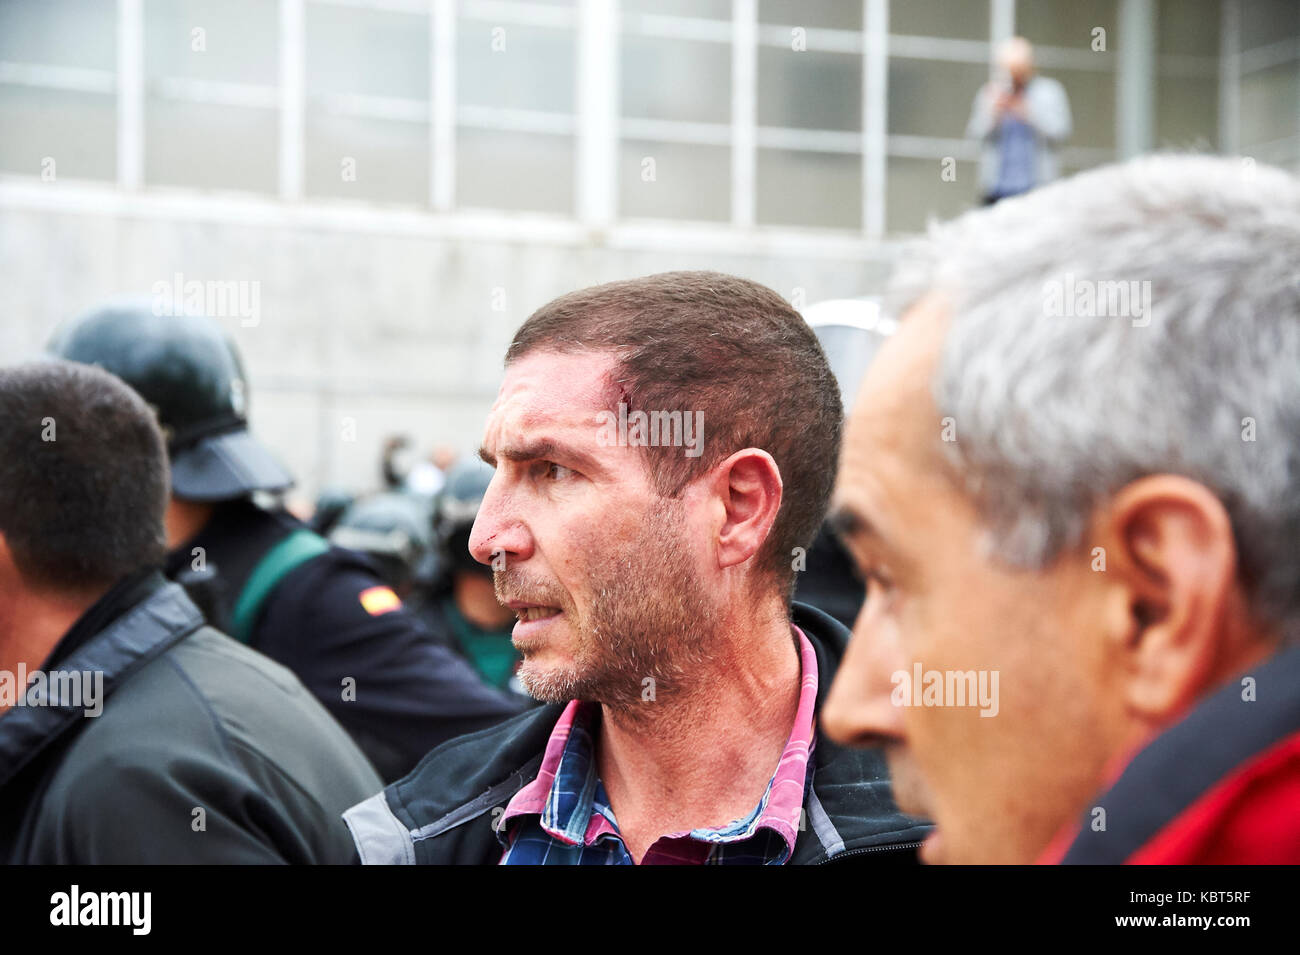 Girona, Spain. 1 October, 2017. A man injured by the Guardia Civil at Sant Julia de Ramis, place of vote of the catalan president Carles Puigdemont. The Guardia Civil charge against the people impeding that makes a vote. The referendum has been deemed illegal by the Spanish government in Madrid Credit: Pablo Guillen/Alamy Live News Stock Photo